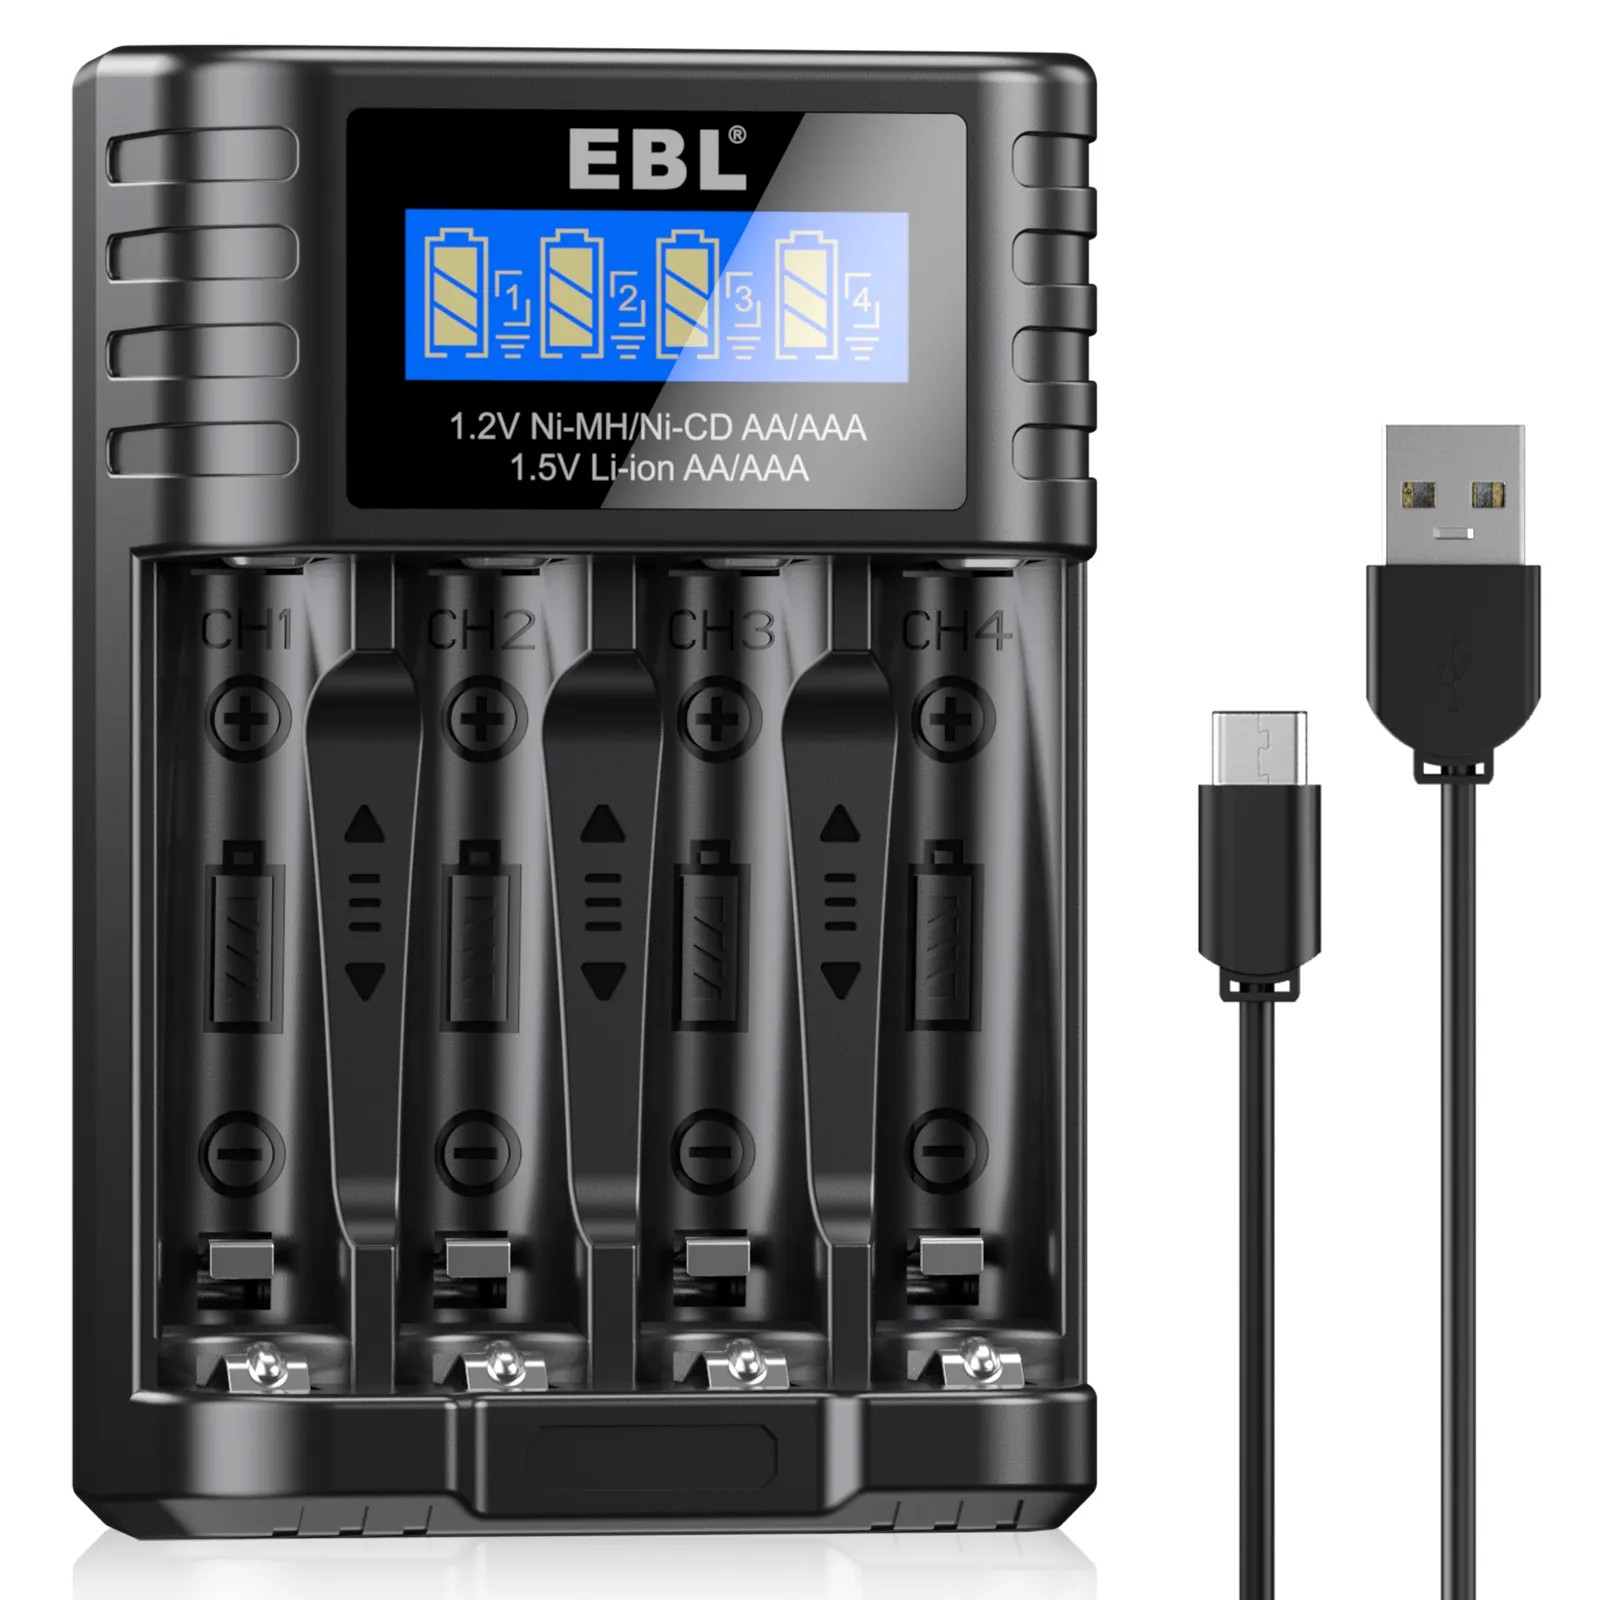 Chargeur de charge rapide intelligent portable 1.5V 1.2V Li-ion/Ni-MH/Ni-CD piles AA AAA rechargeables au lithium Type-C